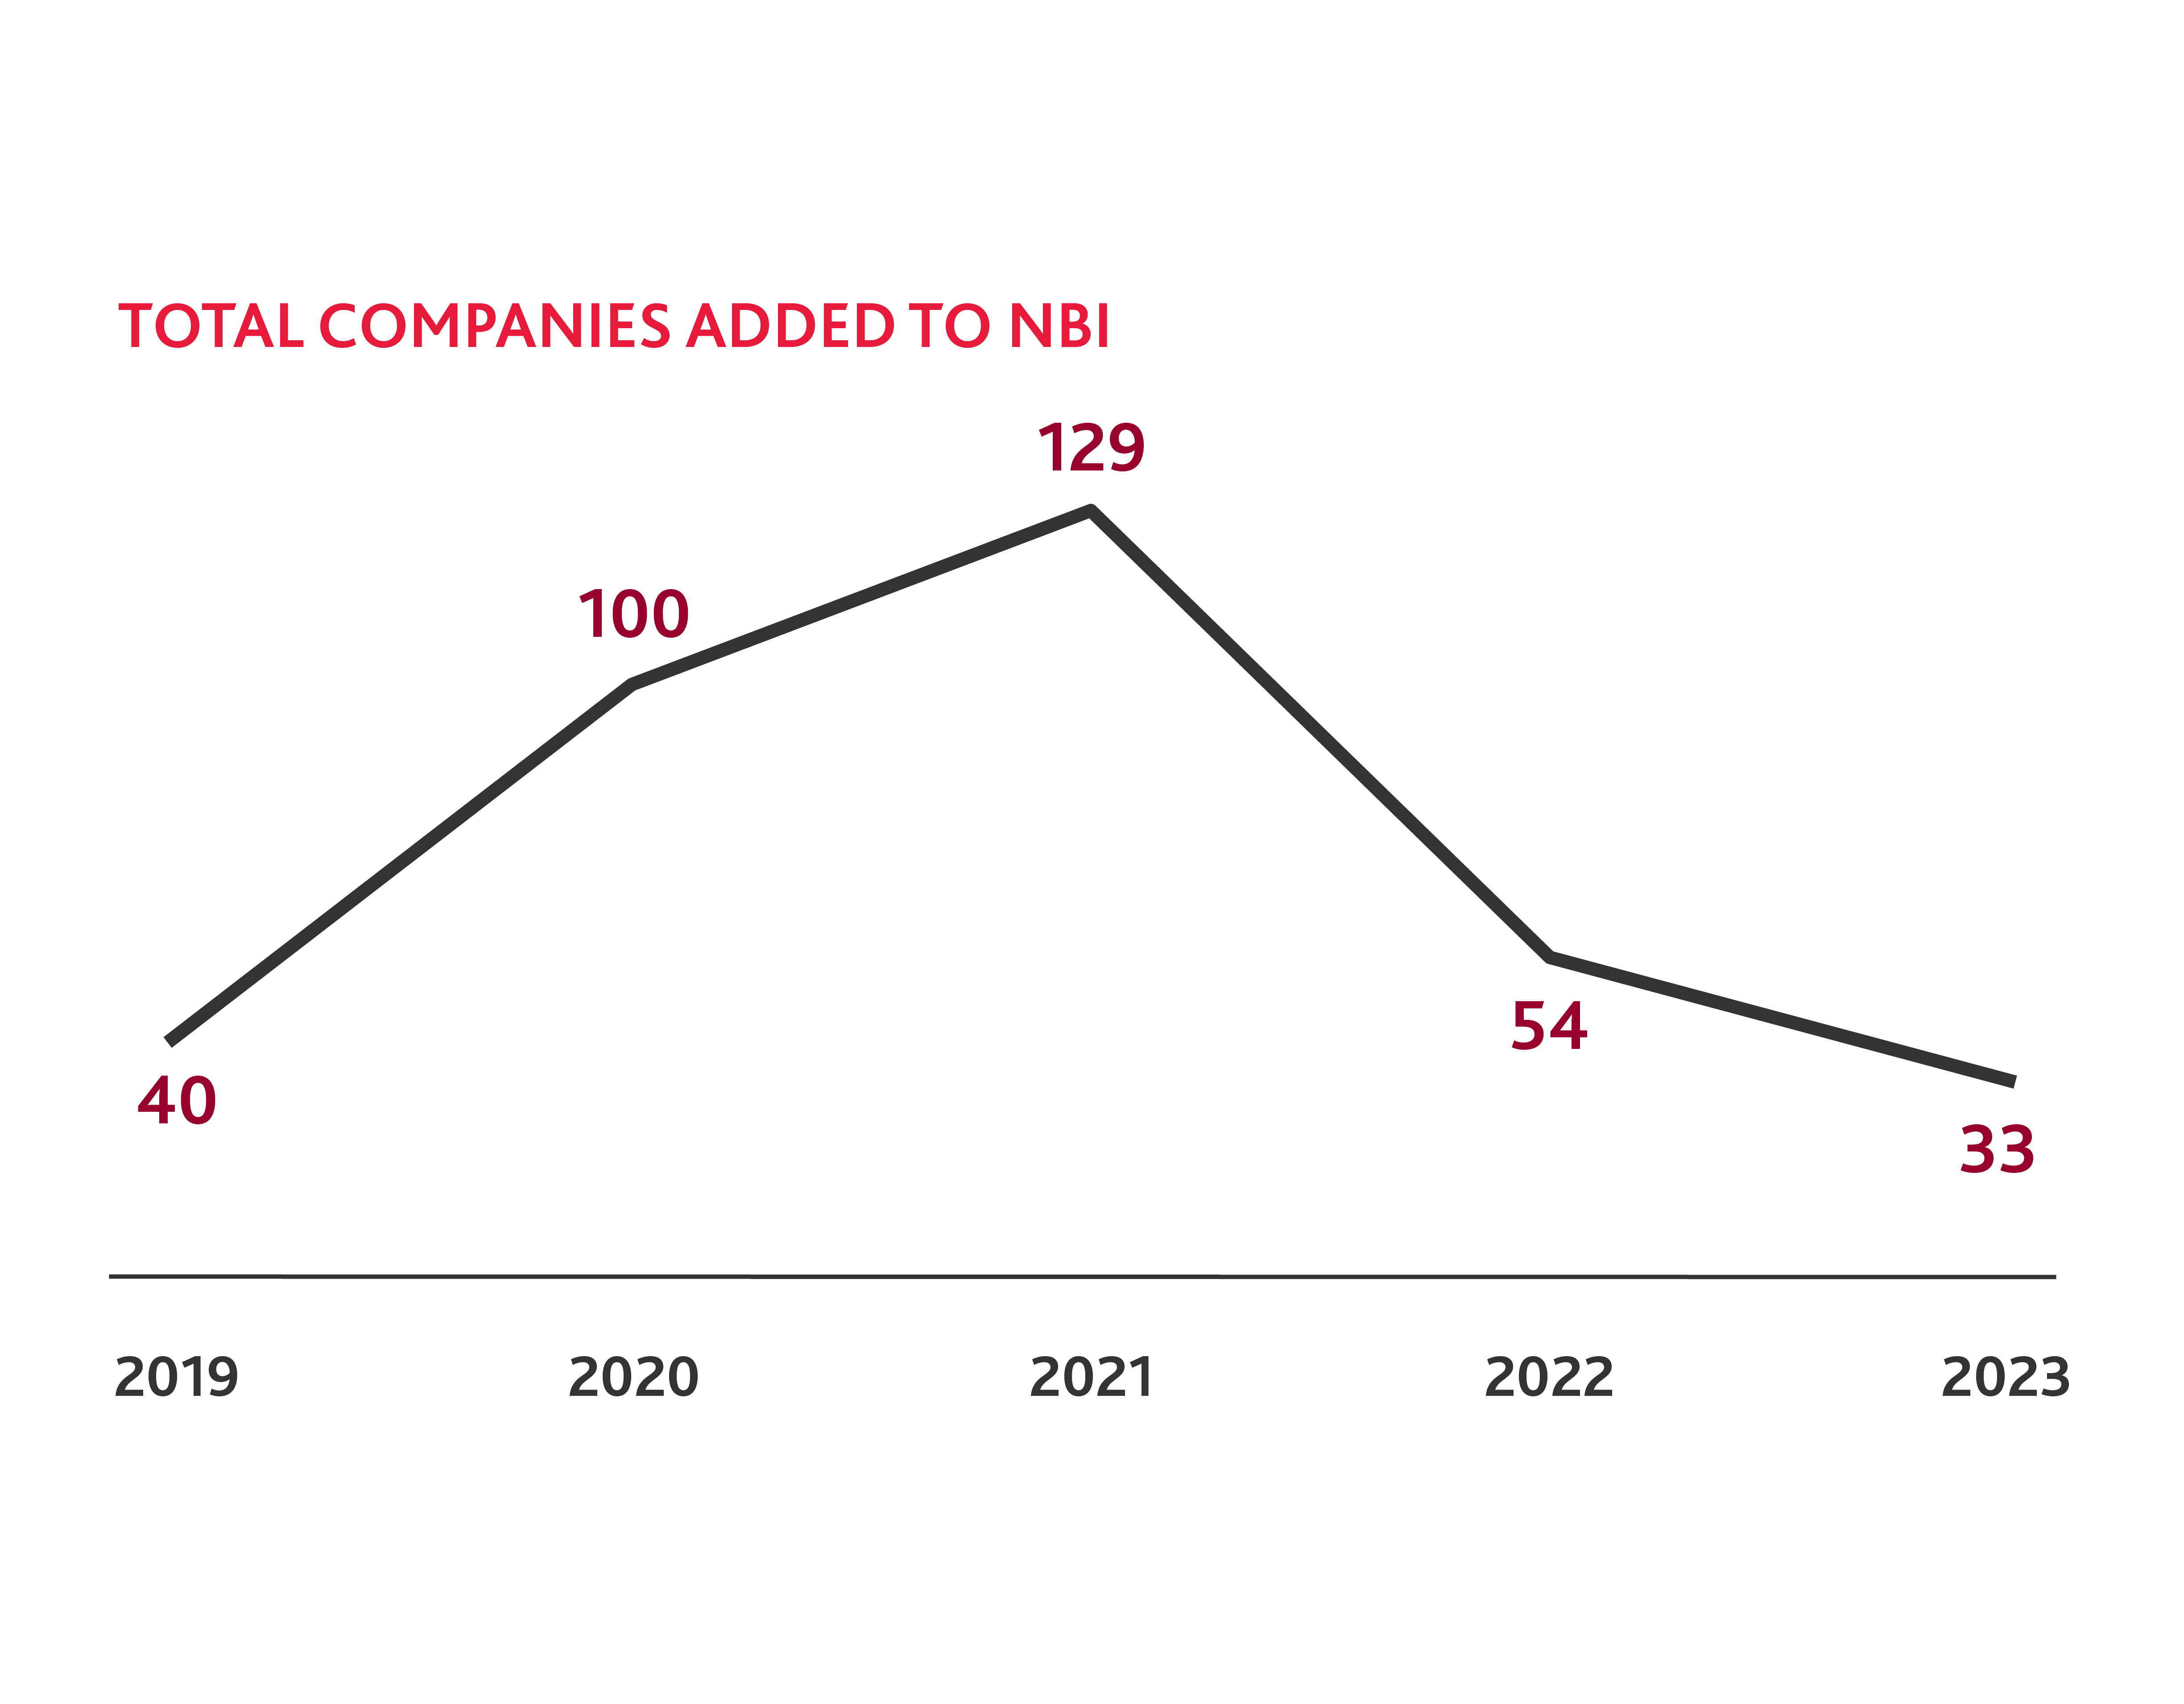 Graph of total companies added to NBI from 2019 to 2023